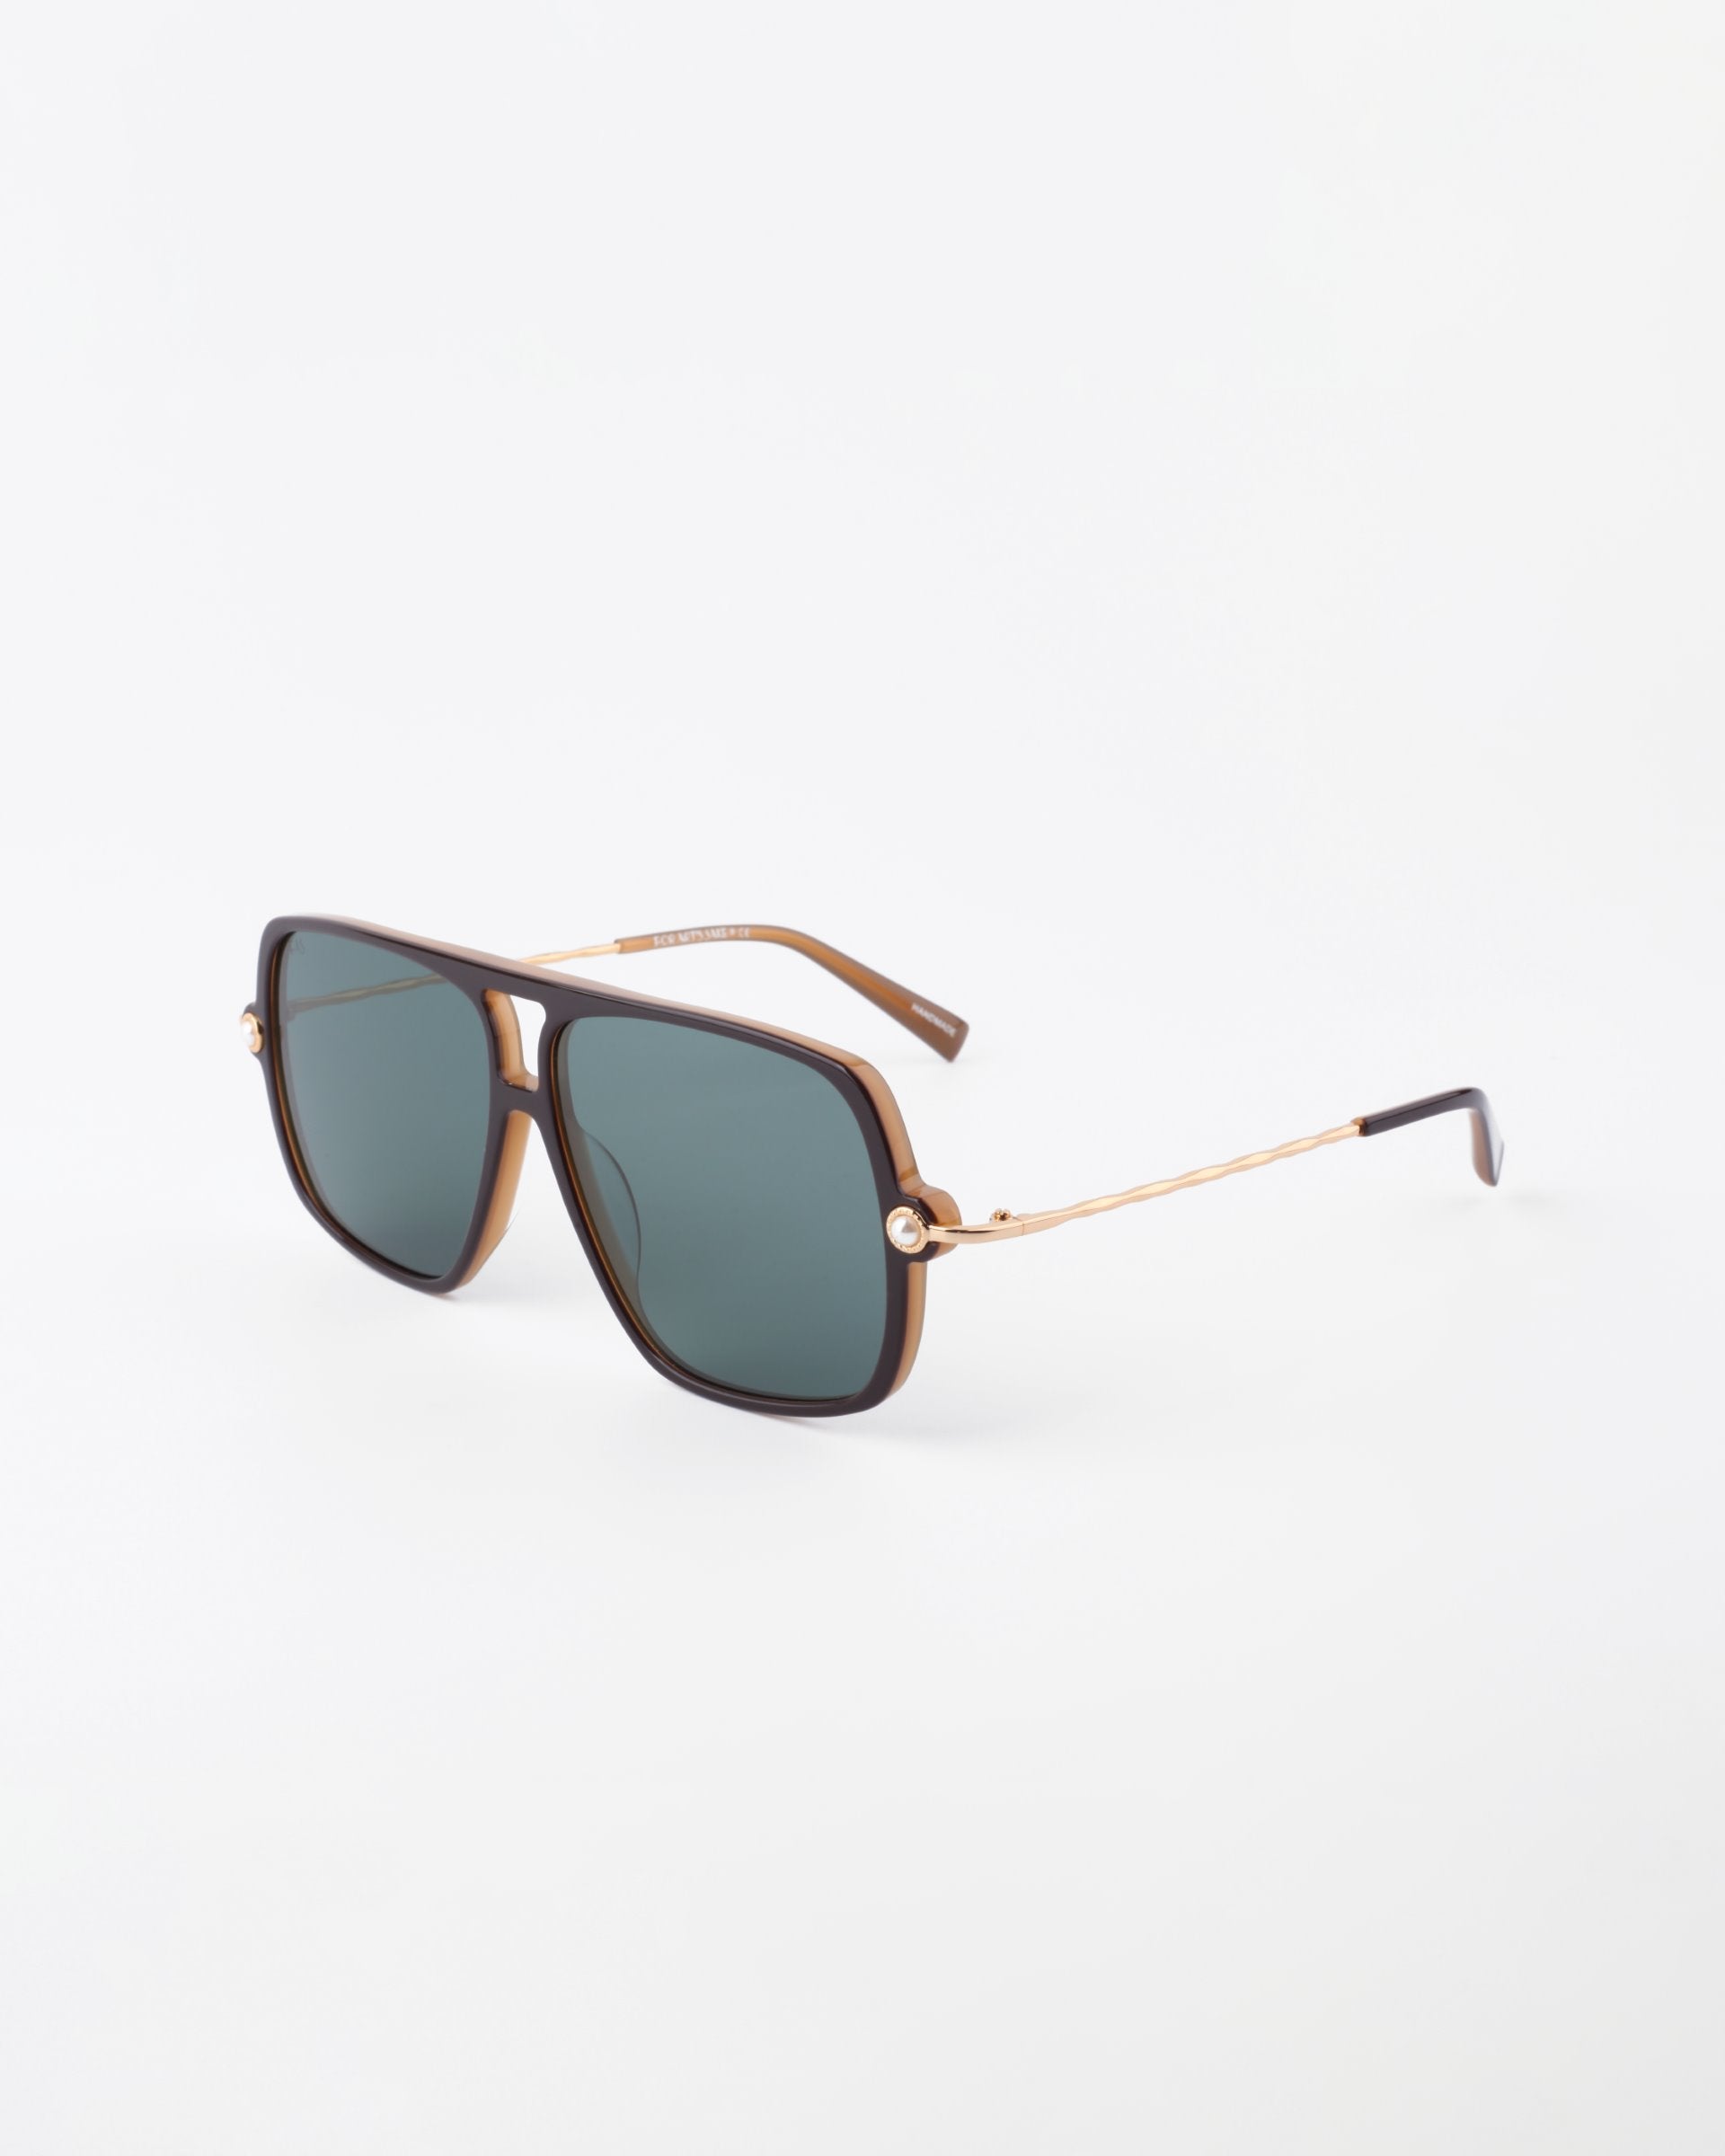 A pair of stylish For Art&#39;s Sake® Cinnamon sunglasses featuring a brown square frame with 18-karat gold-plated metal arms and dark tinted lenses. The sunglasses have a chic, modern design with a minimalist aesthetic. The background is plain white.